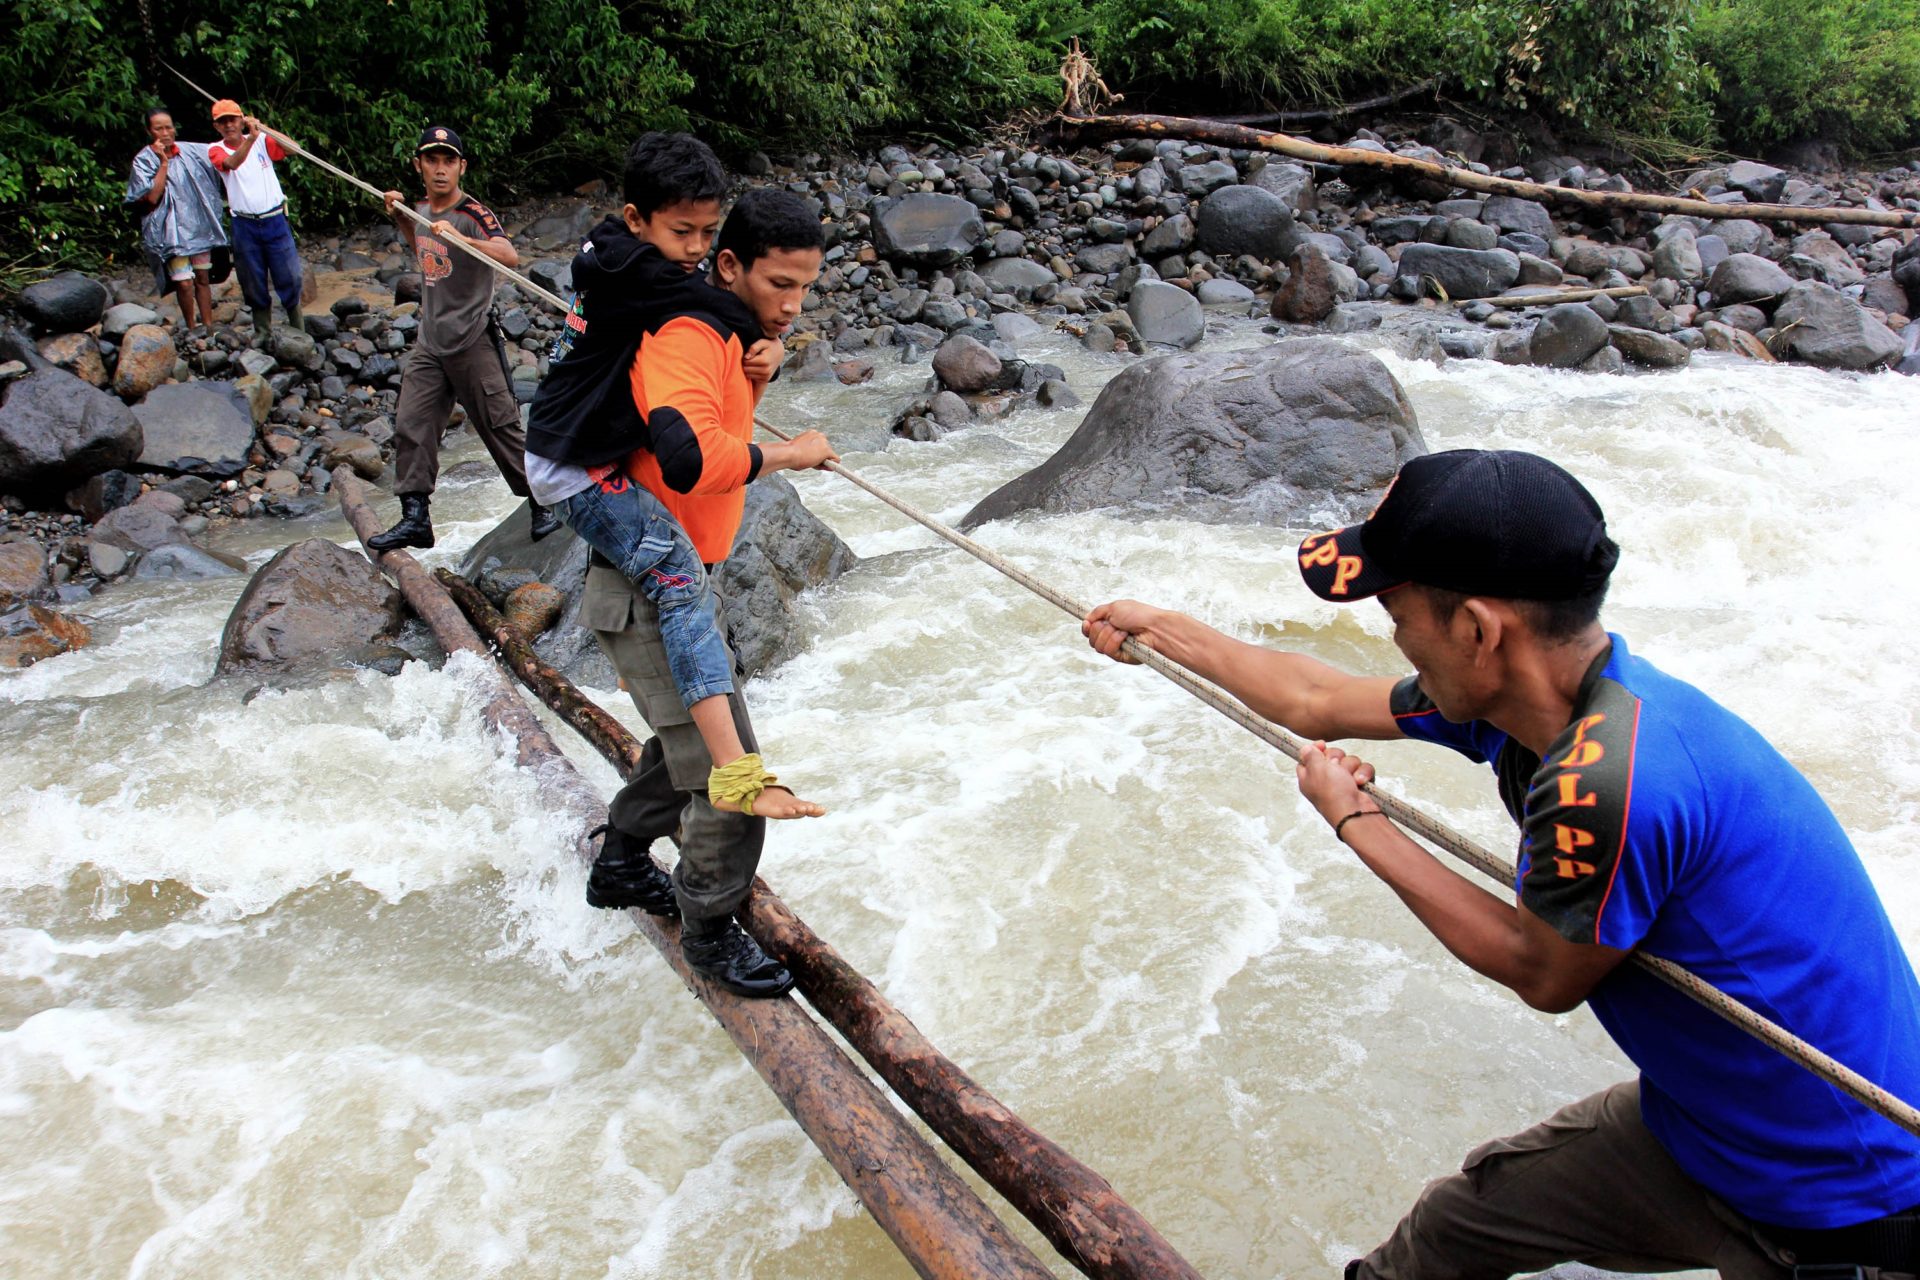 Using a rope, a man helps pull several men and boys cross a river on two thin logs.